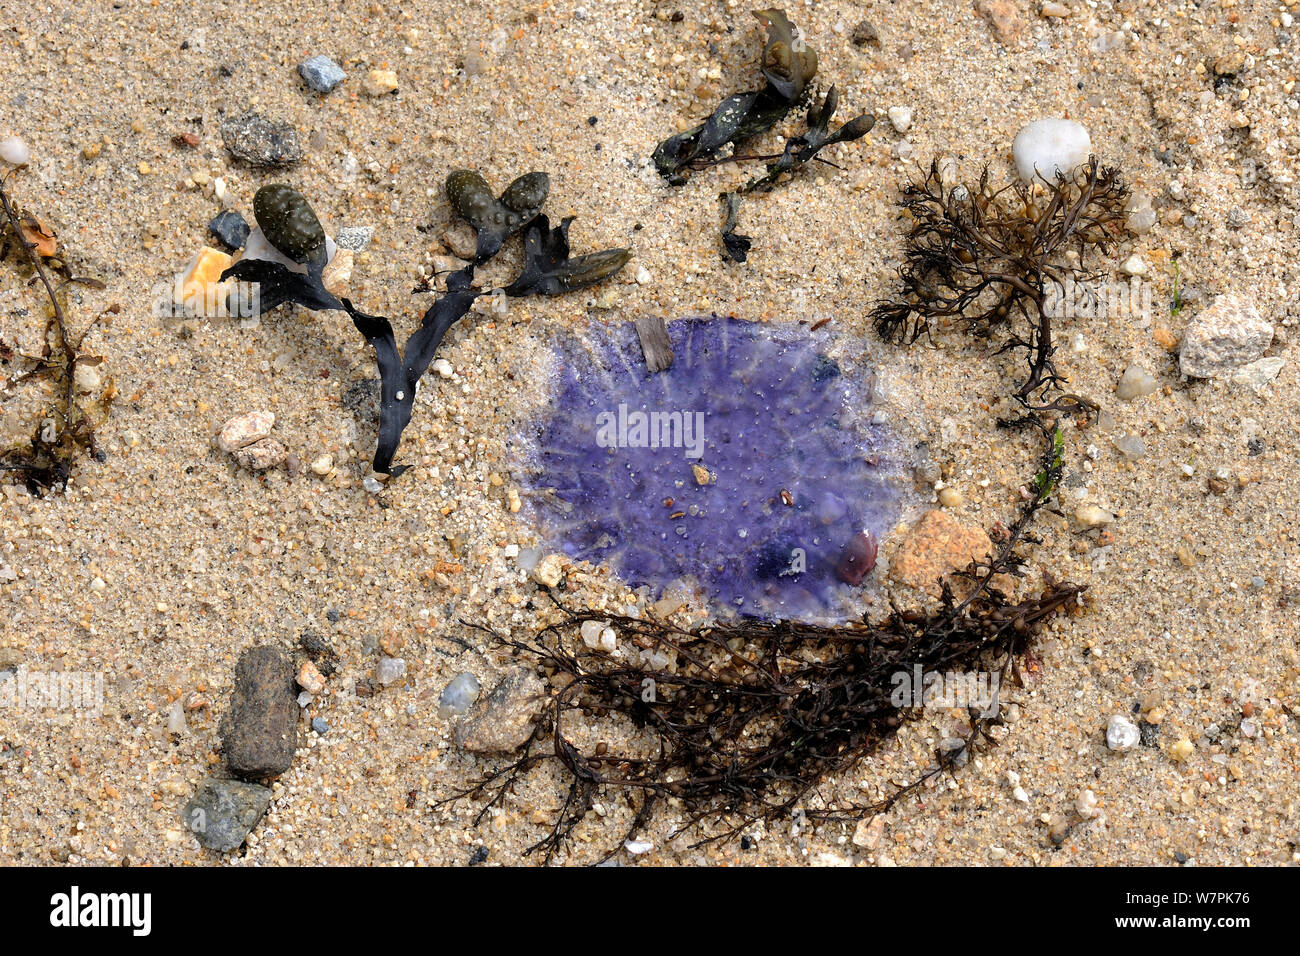 Jellyfish and seaweed washed up on beach, Ile-aux-Moines, Morbihan Gulf, Brittany, France, May Stock Photo